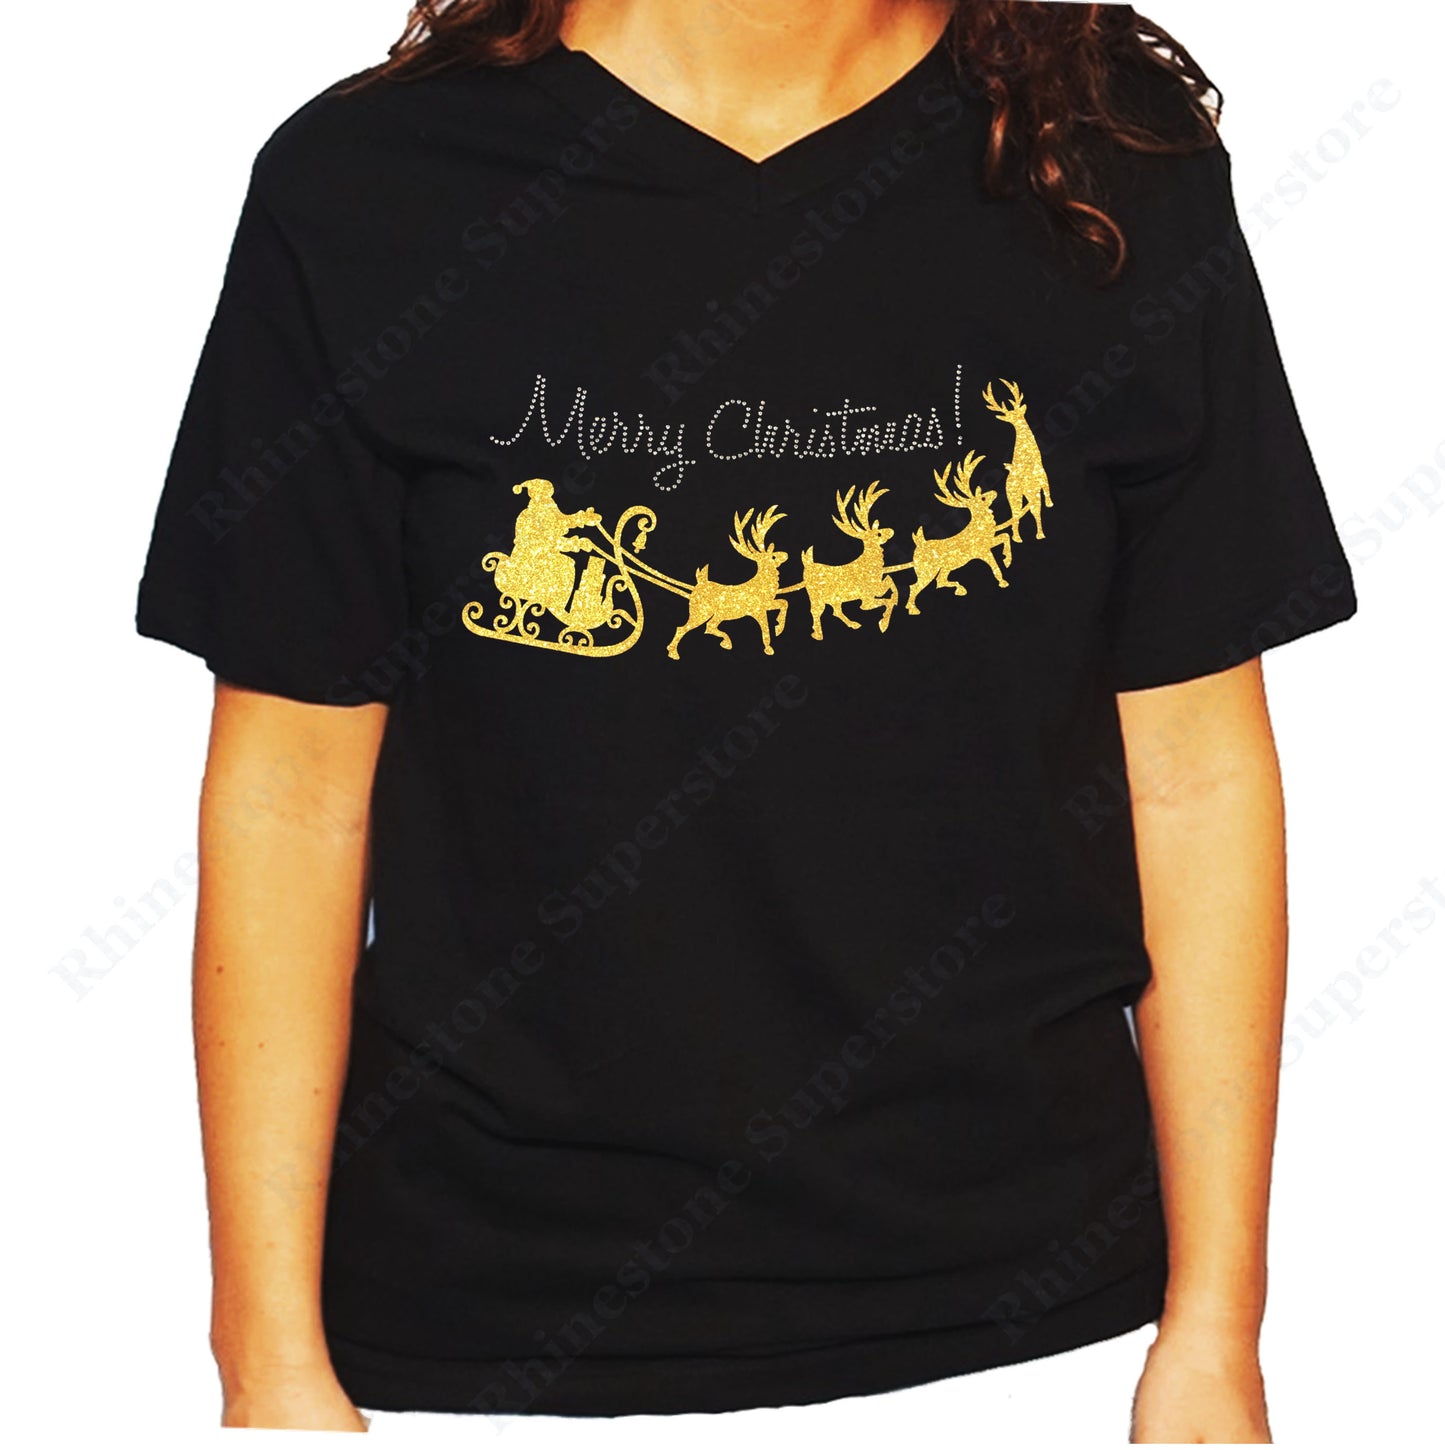 Women's / Unisex T-Shirt with Merry Christmas with Yellow Santa Sleigh in Glitters and Rhinestones